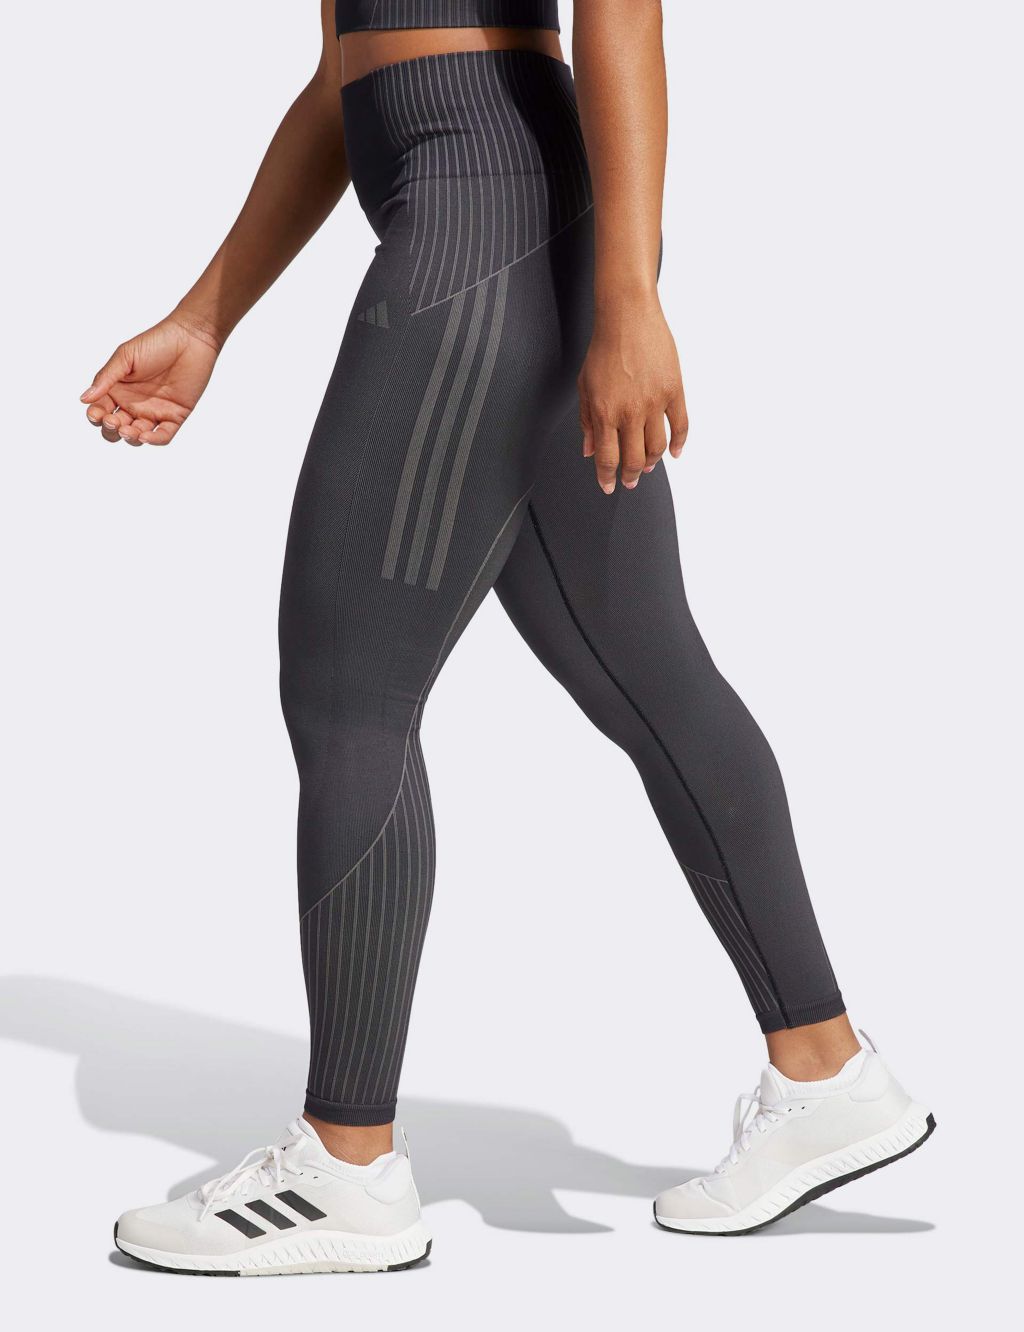 adidas presents its first period proof leggings